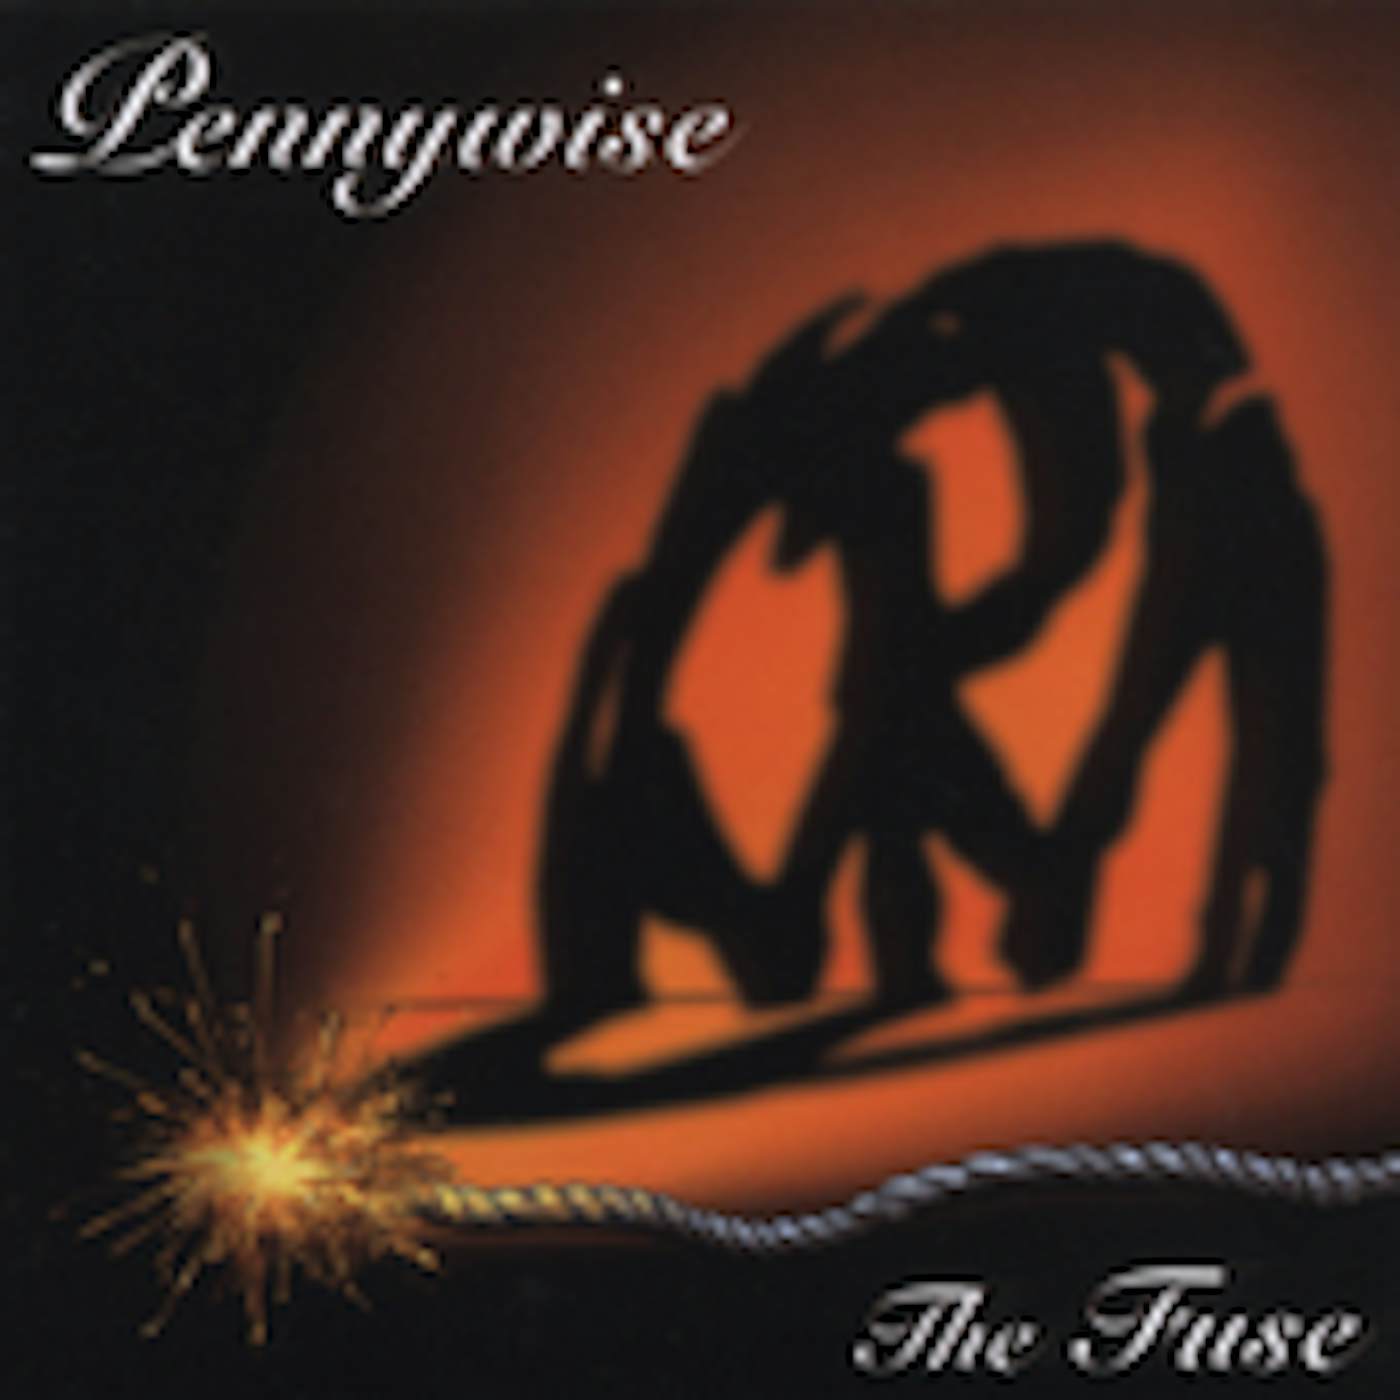 Pennywise FUSE CD